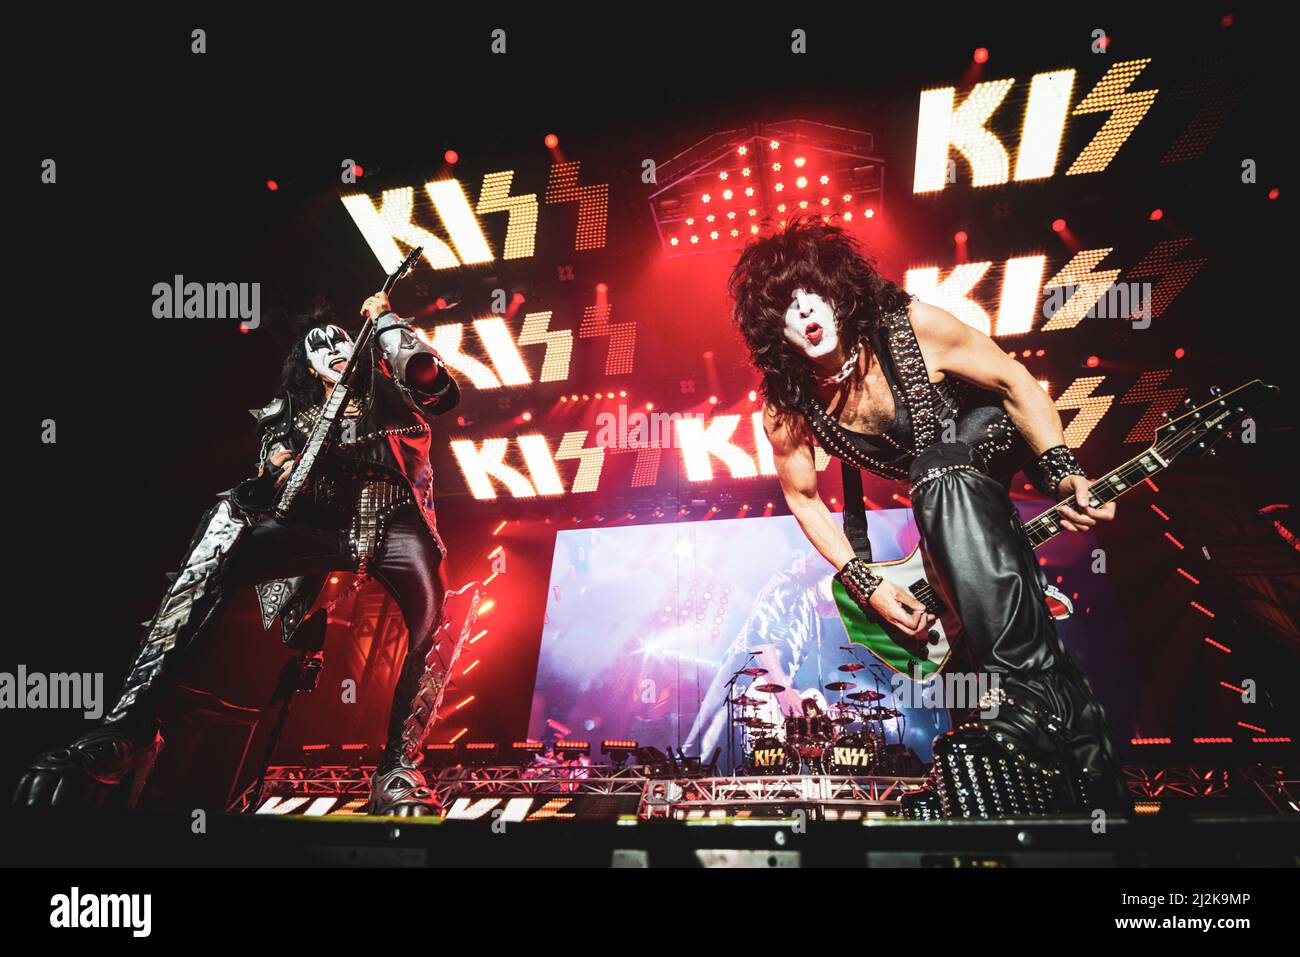 ITALY, BOLOGNA, UNIPOL ARENA 2017: Gene Simmons and Paul Stanley, of the American rock band “KISS”, performing live on stage for the “World Tour” European leg Stock Photo